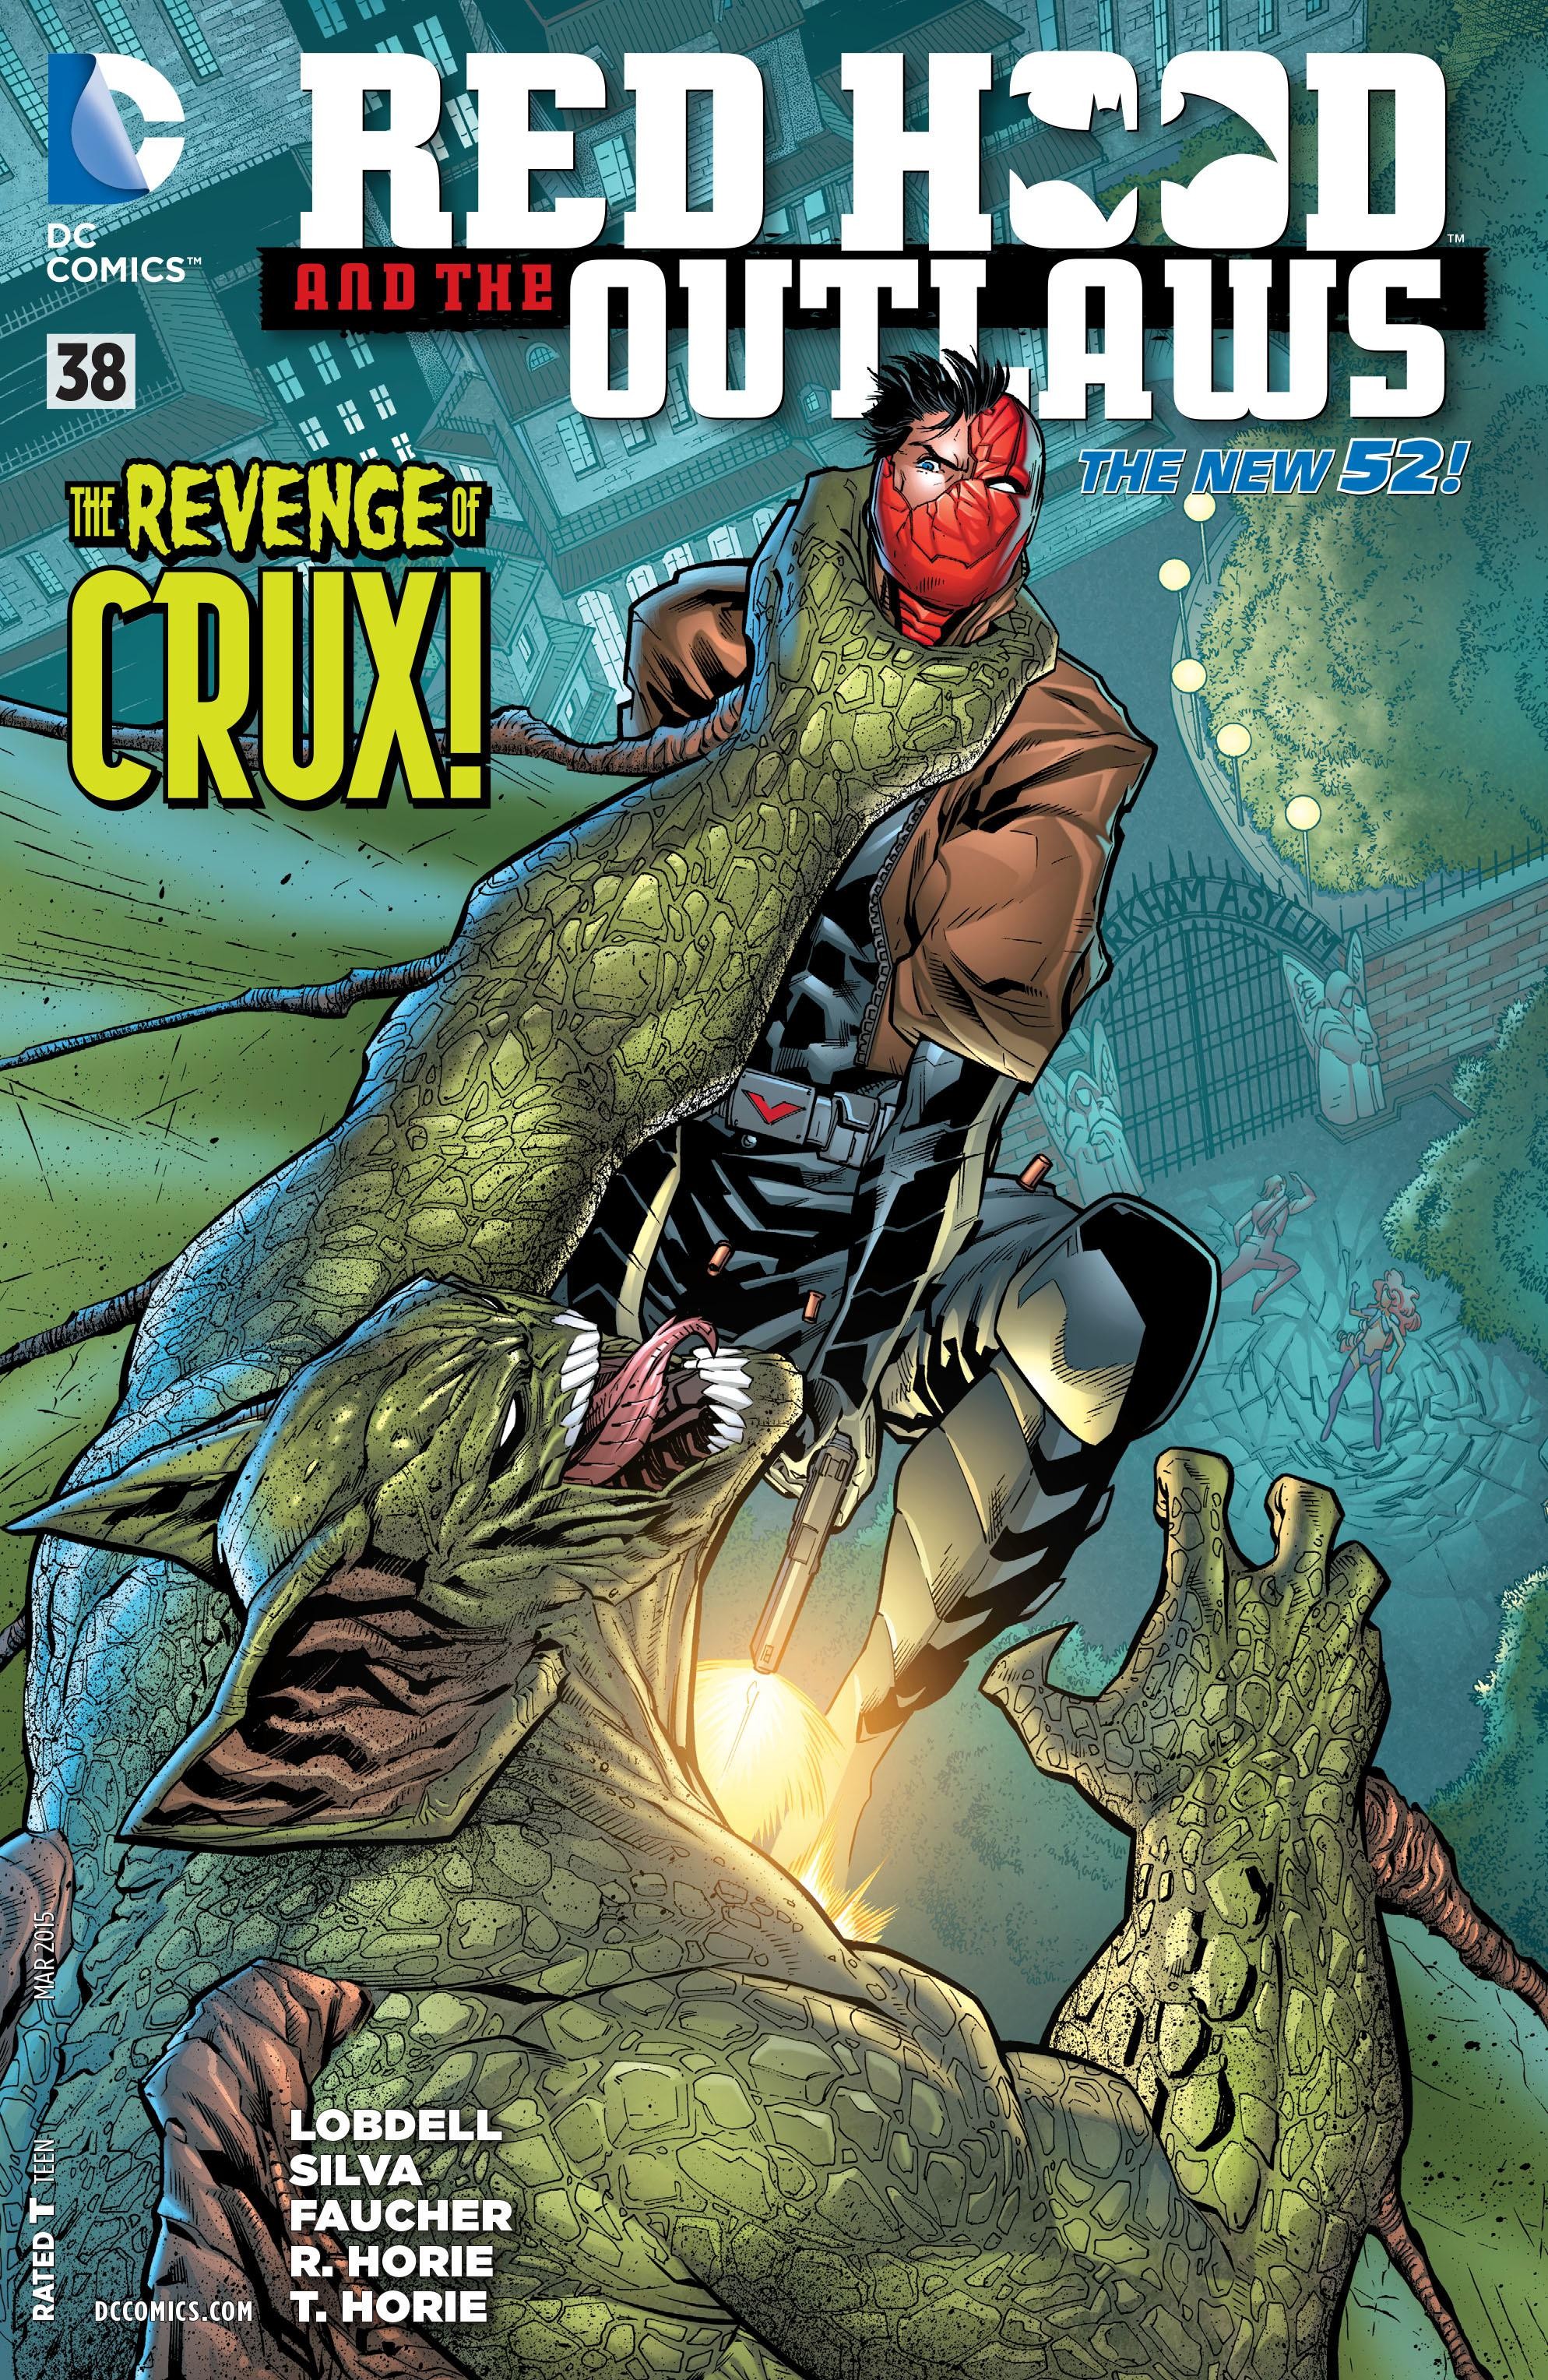 Red Hood and the Outlaws Vol. 1 #38